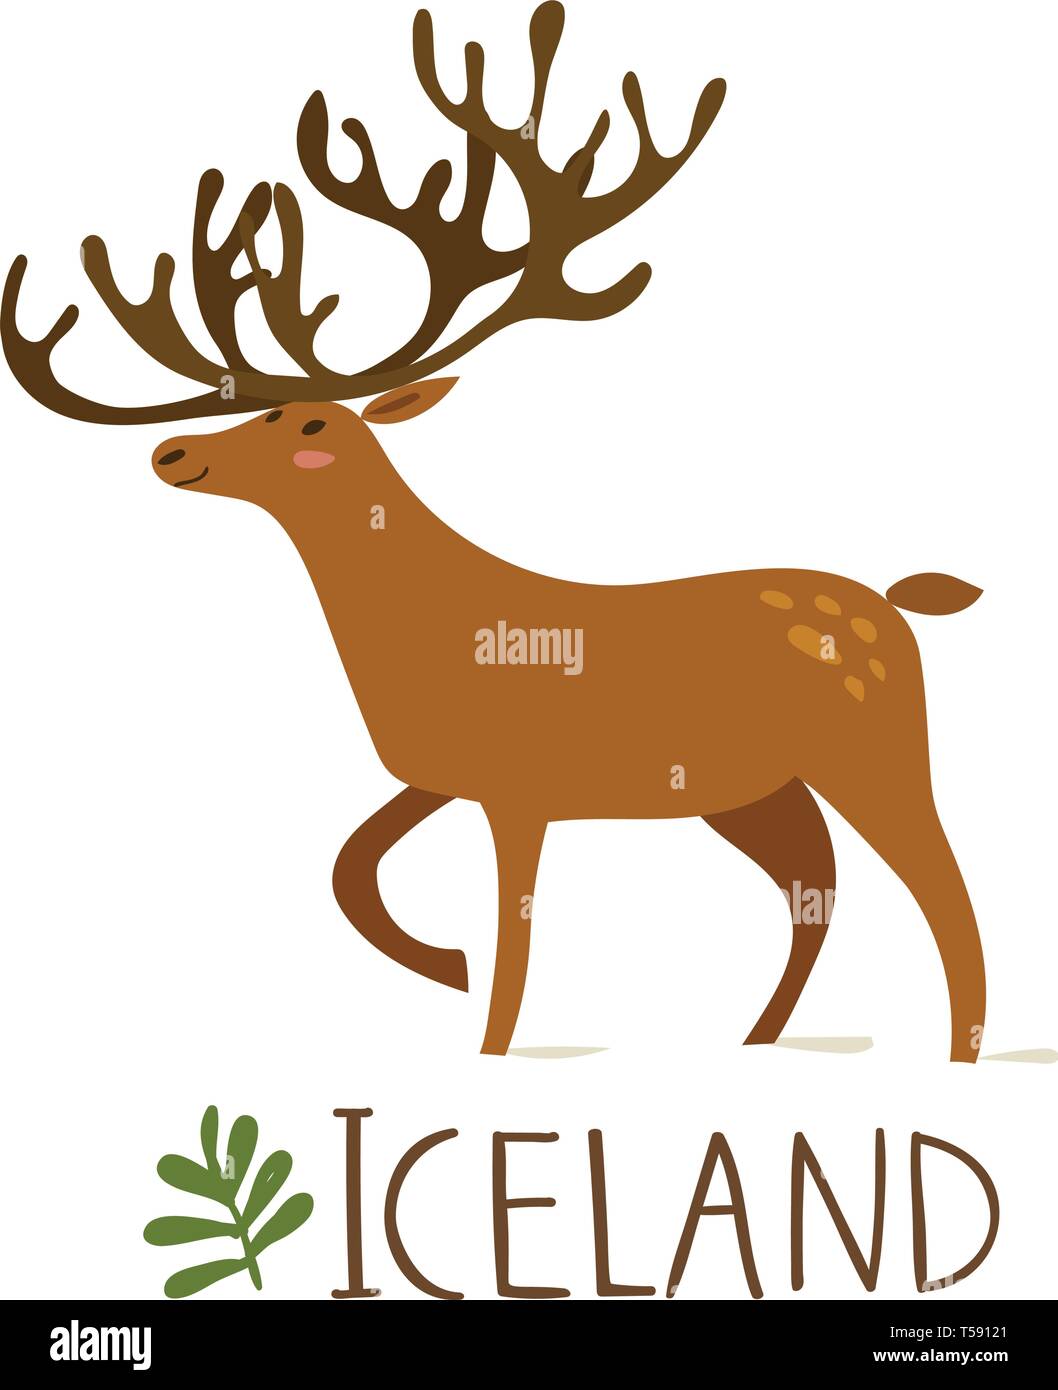 Iceland nature vector symbol deer with text  Stock Vector